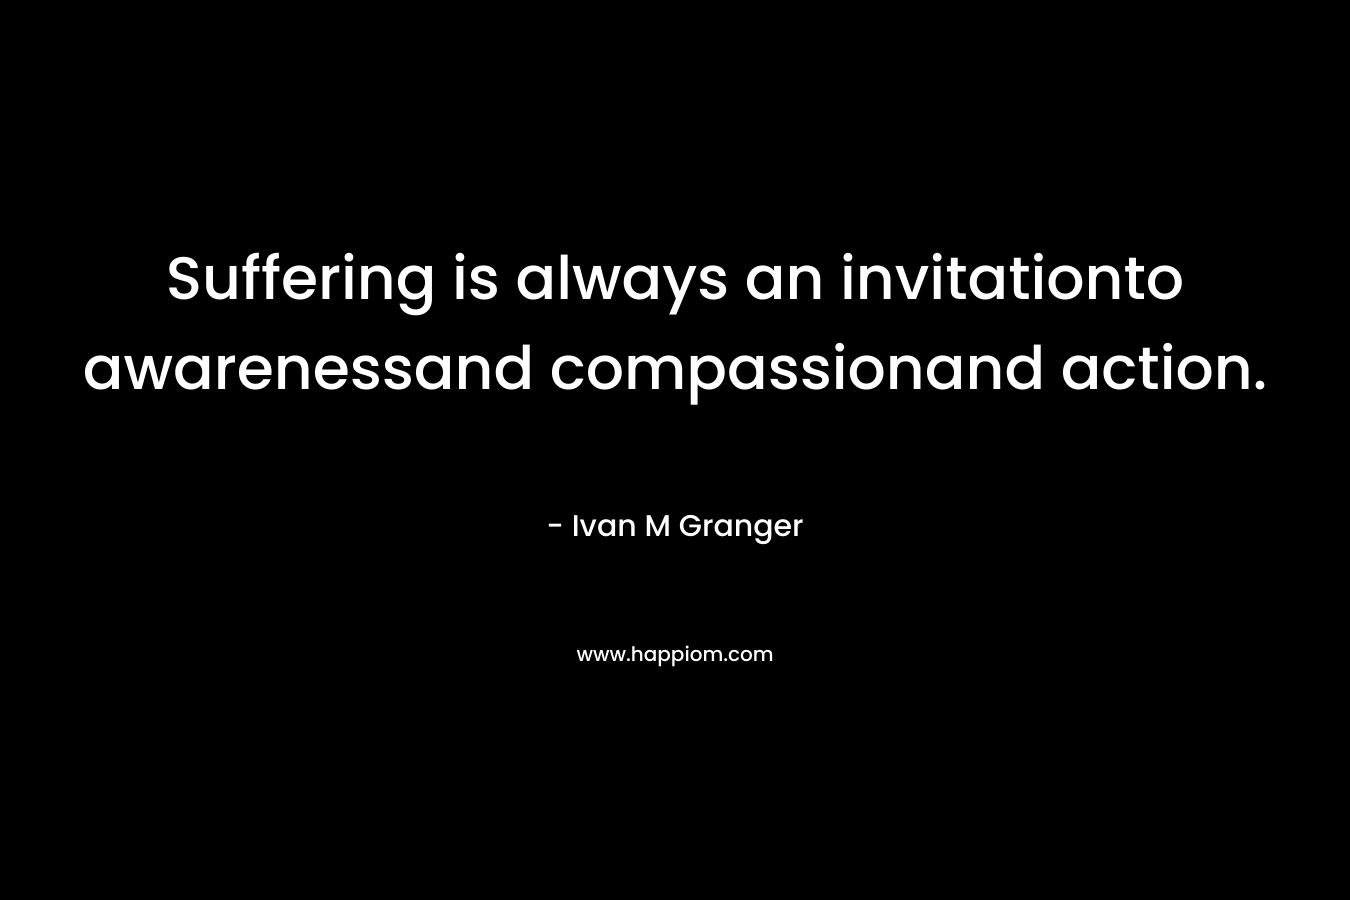 Suffering is always an invitationto awarenessand compassionand action.